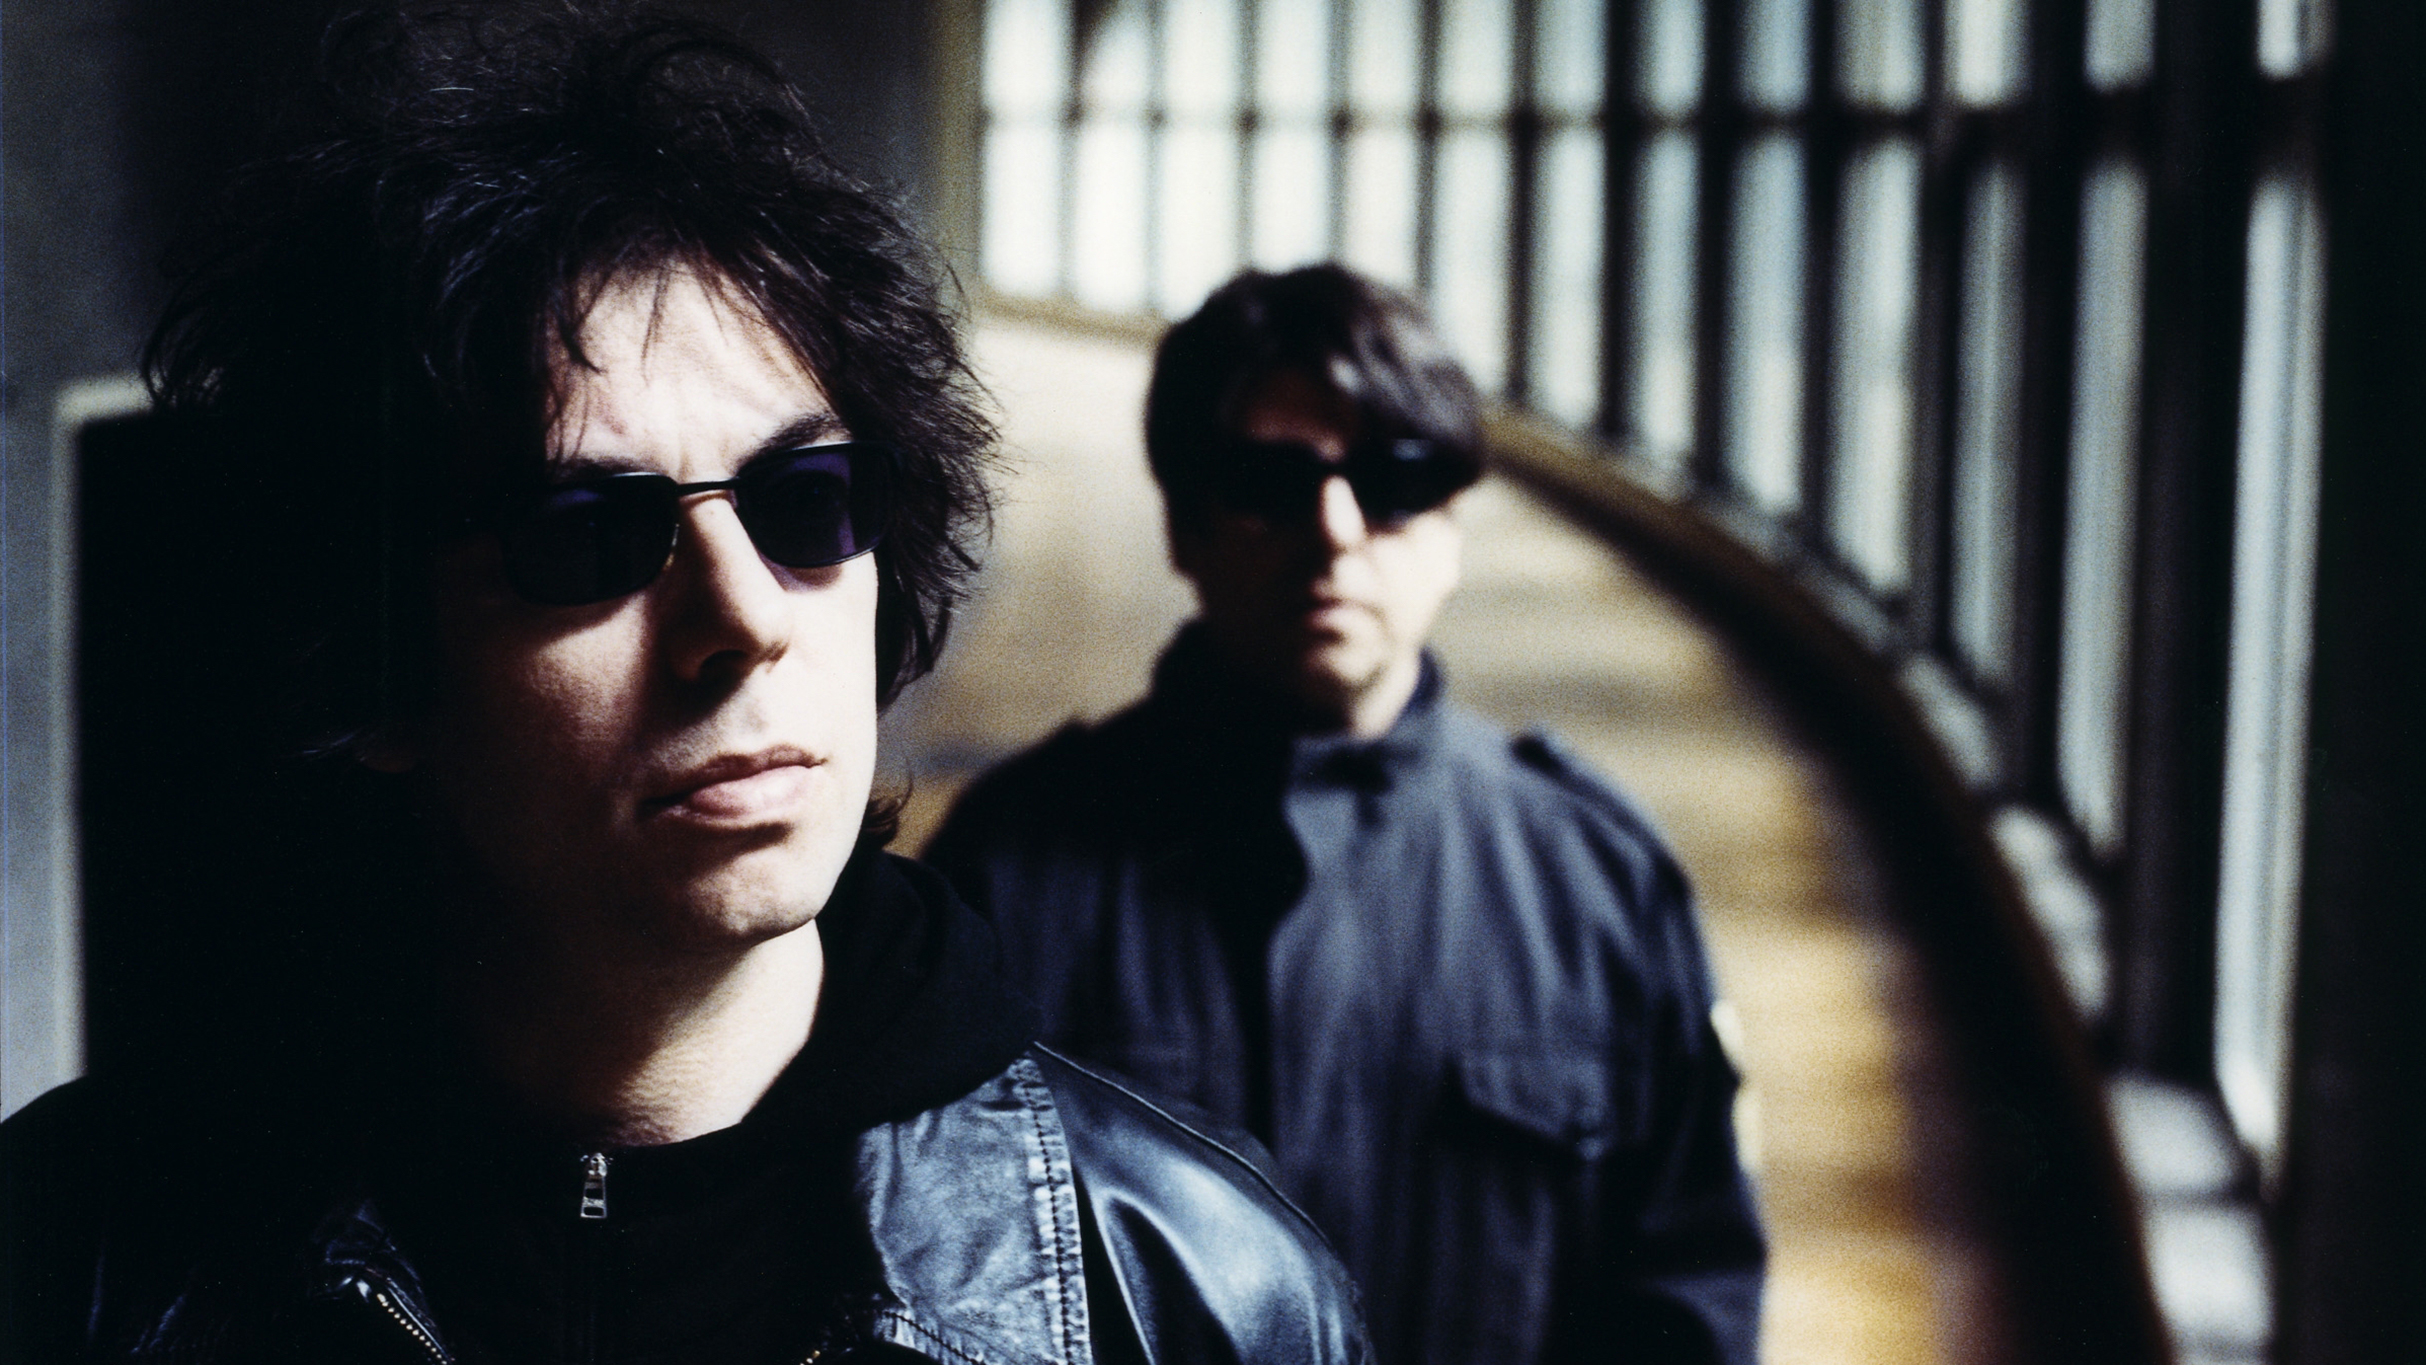 Echo & The Bunnymen: Songs To Learn and Sing @ Rialto Theatre